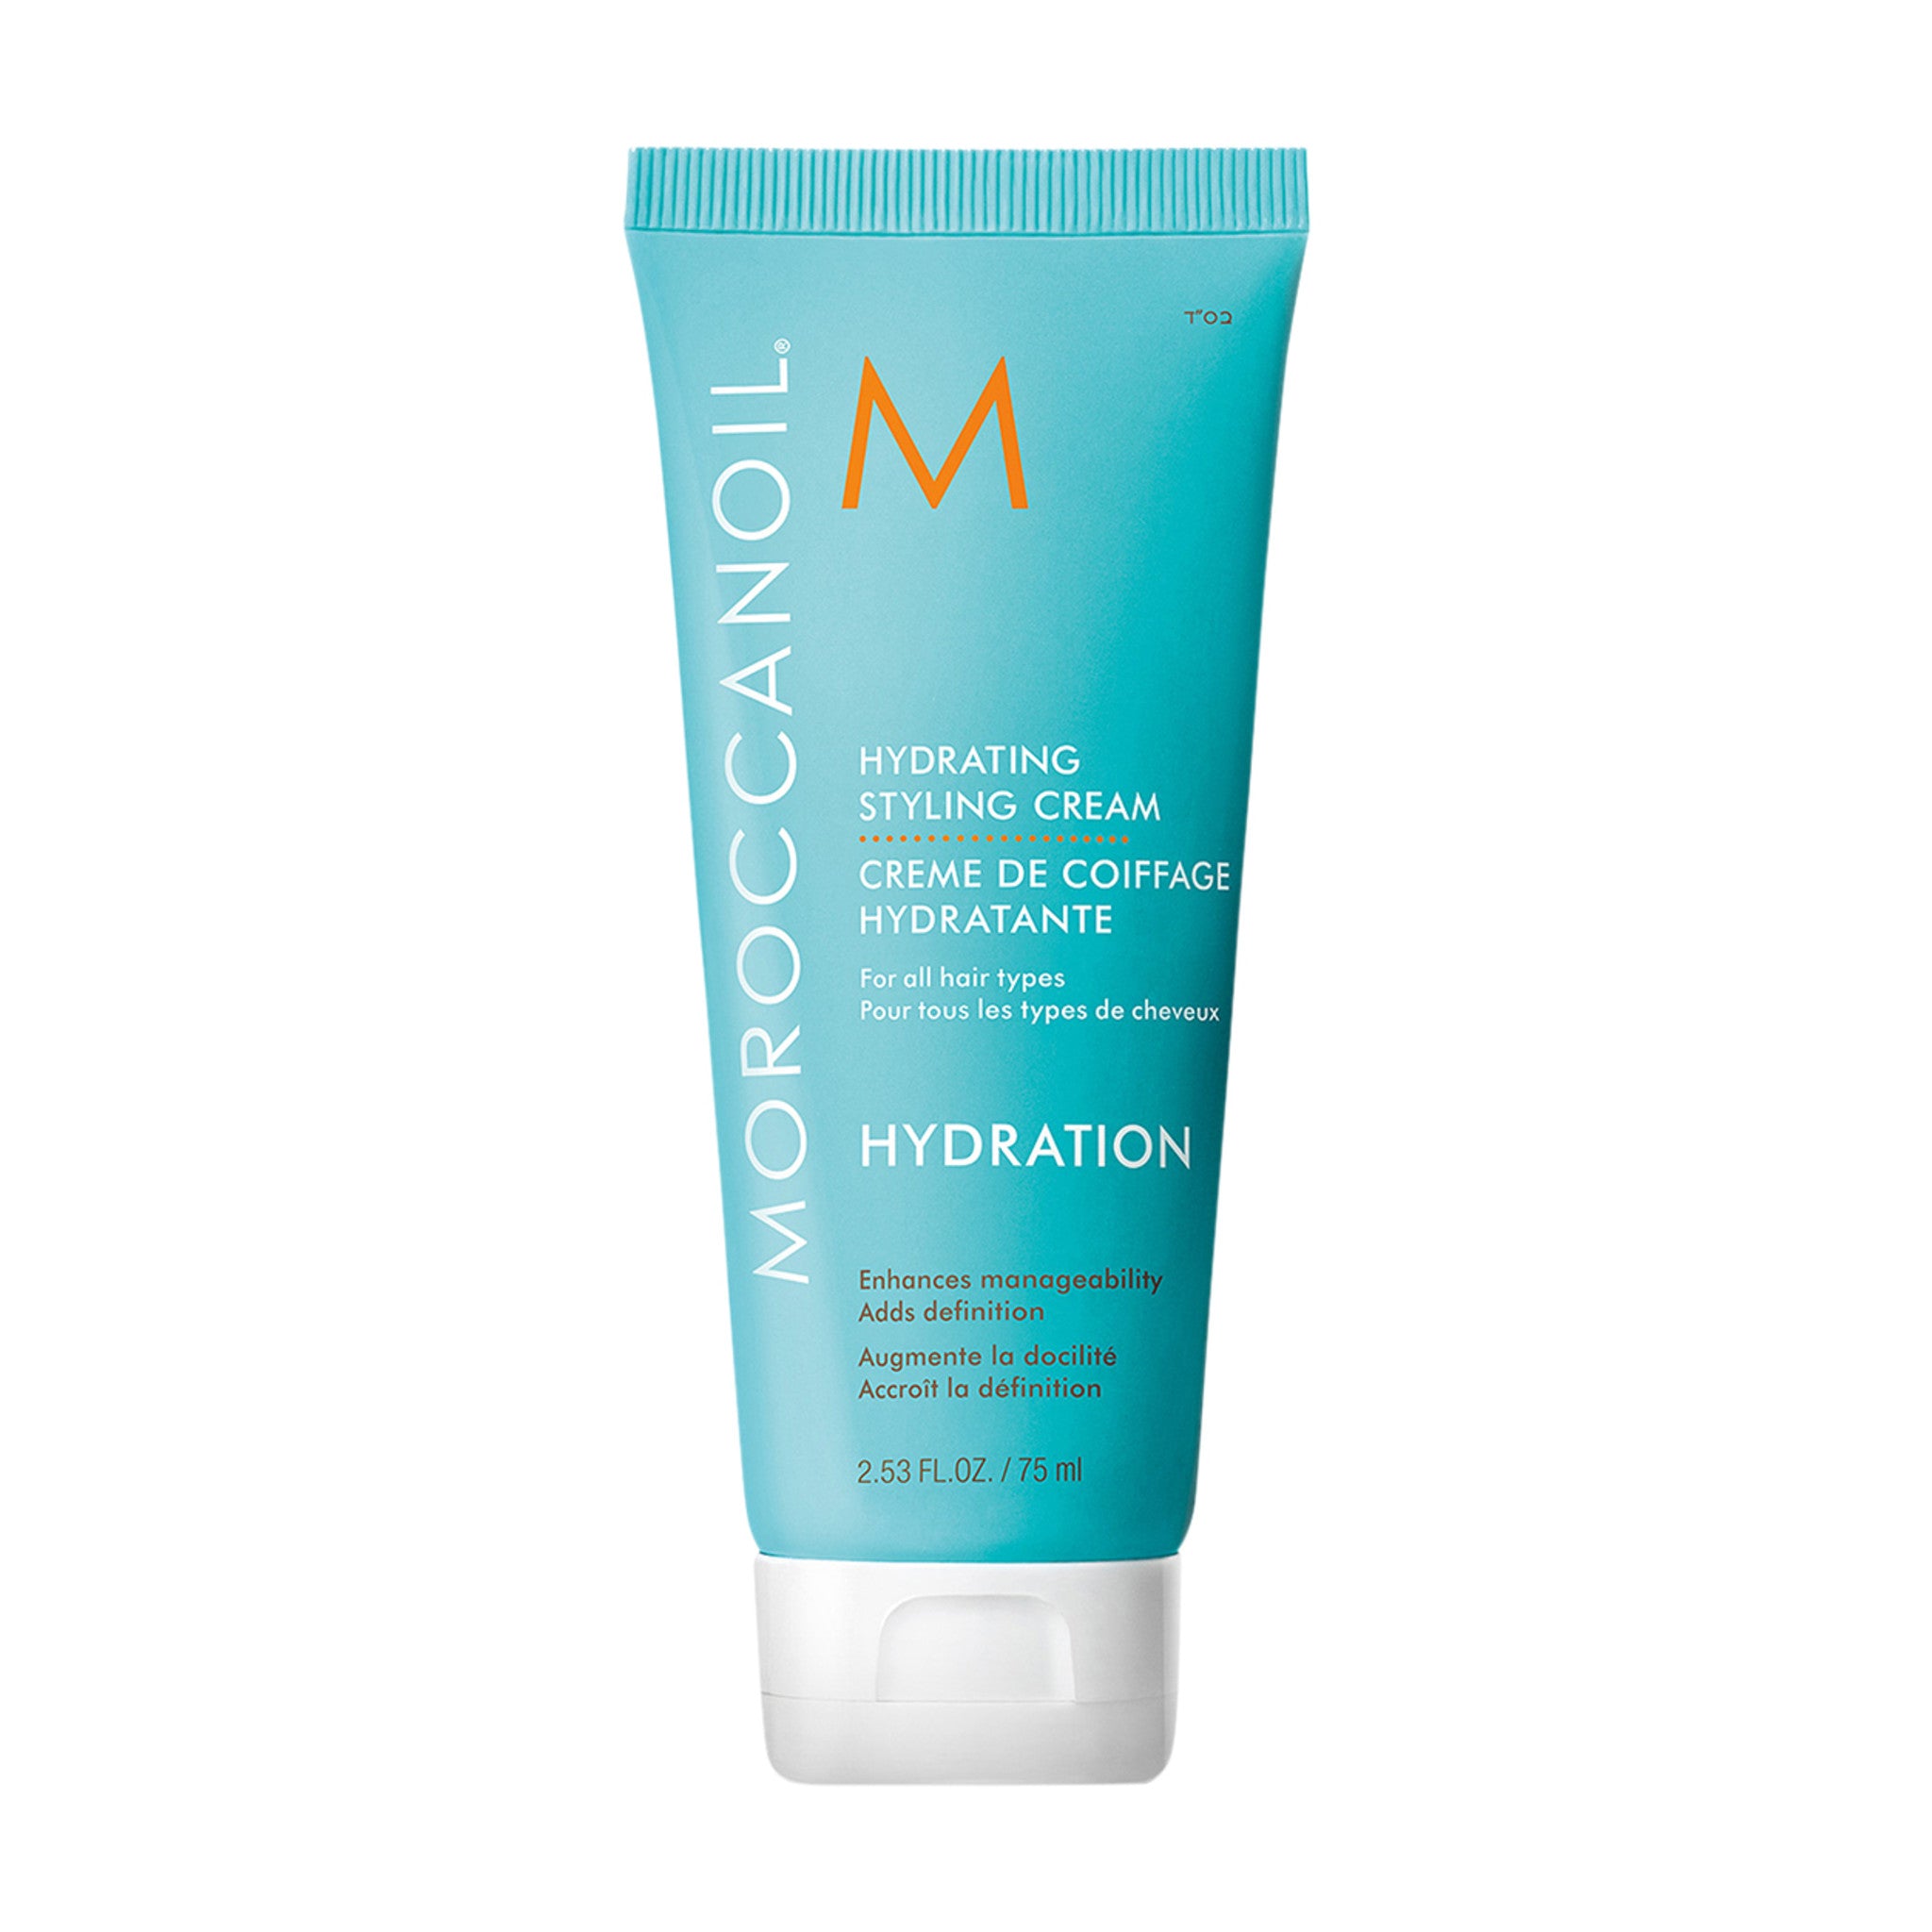 Moroccanoil Hydrating Styling Cream Size variant: 2.5 oz main image.